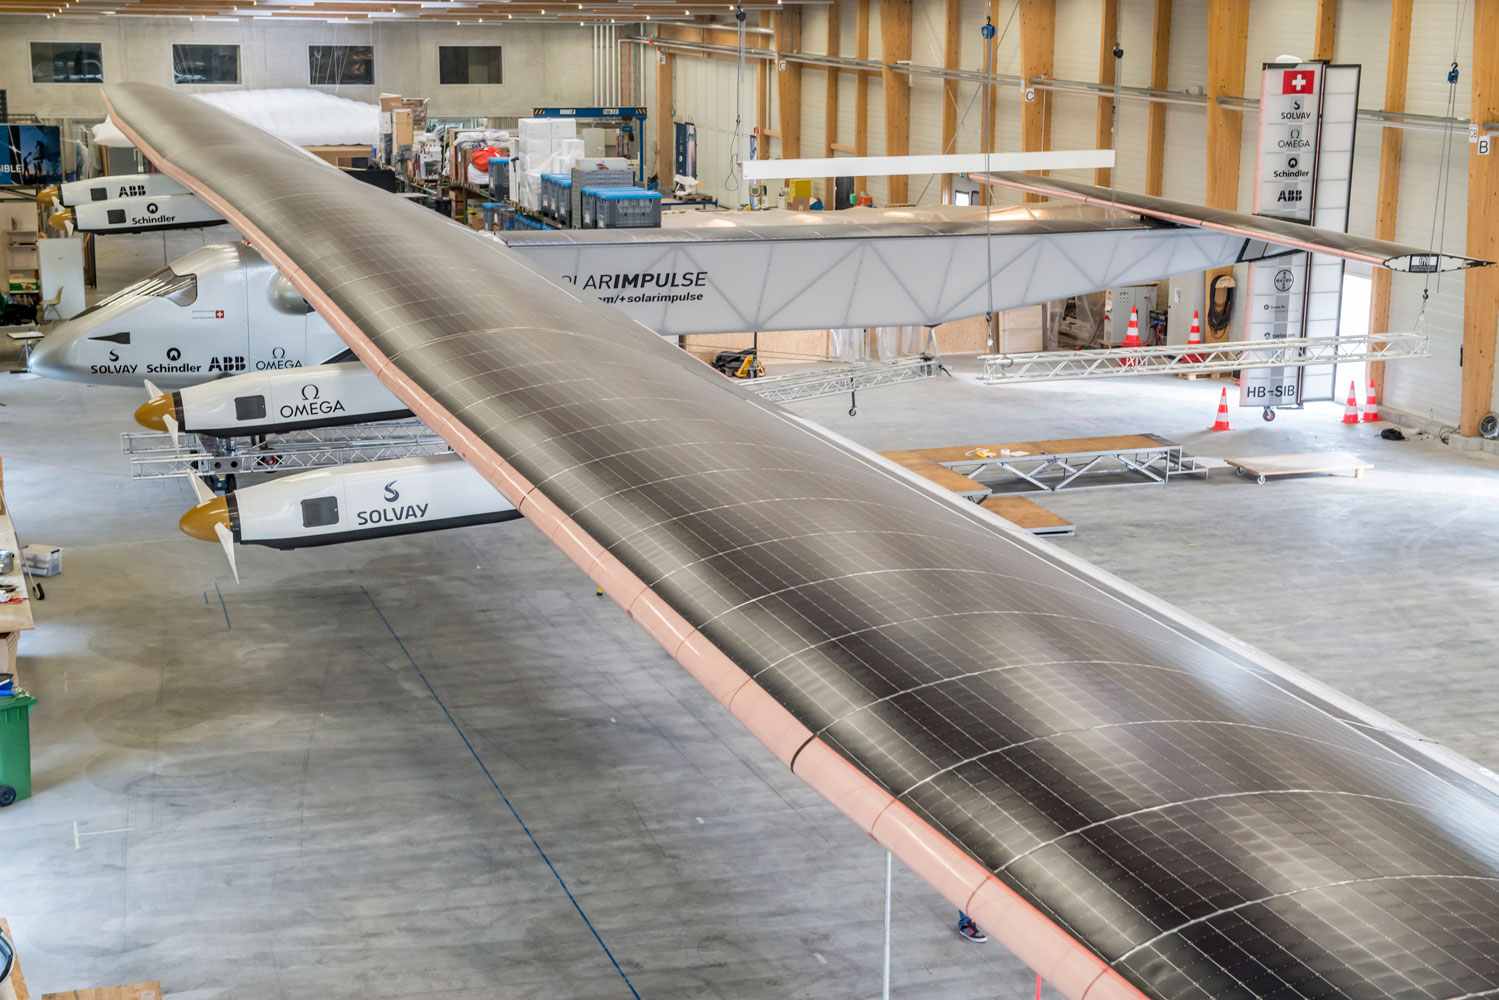 Solar Impulse 2, the second in a series of solar powered planes created by Swiss pioneers Bertrand Piccard and Andre Borschberg, is due to make the first round-the-world solar flight in 2015.